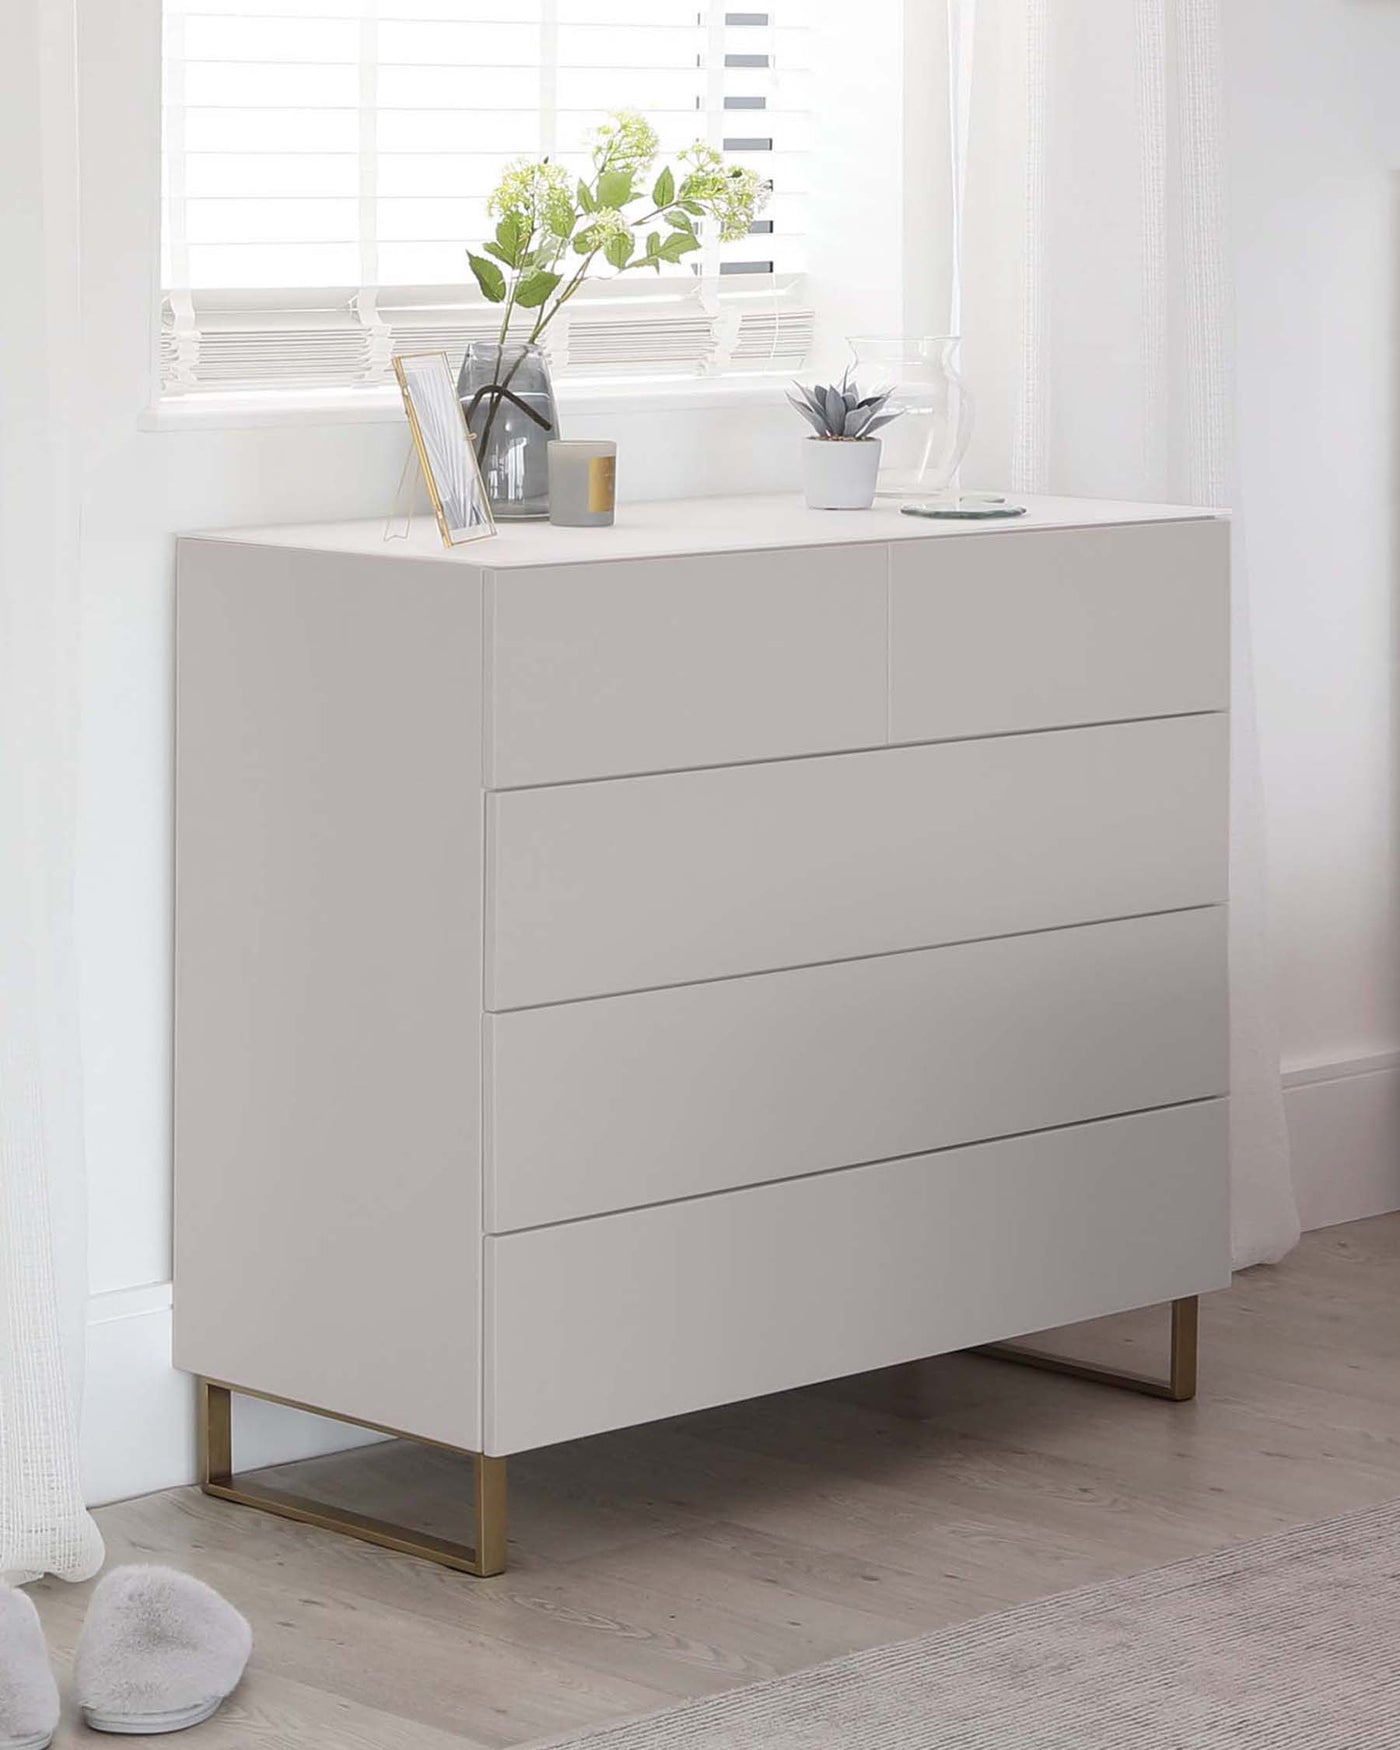 Modern white four-drawer dresser with a minimalist design and elegant brass-finished metal legs.